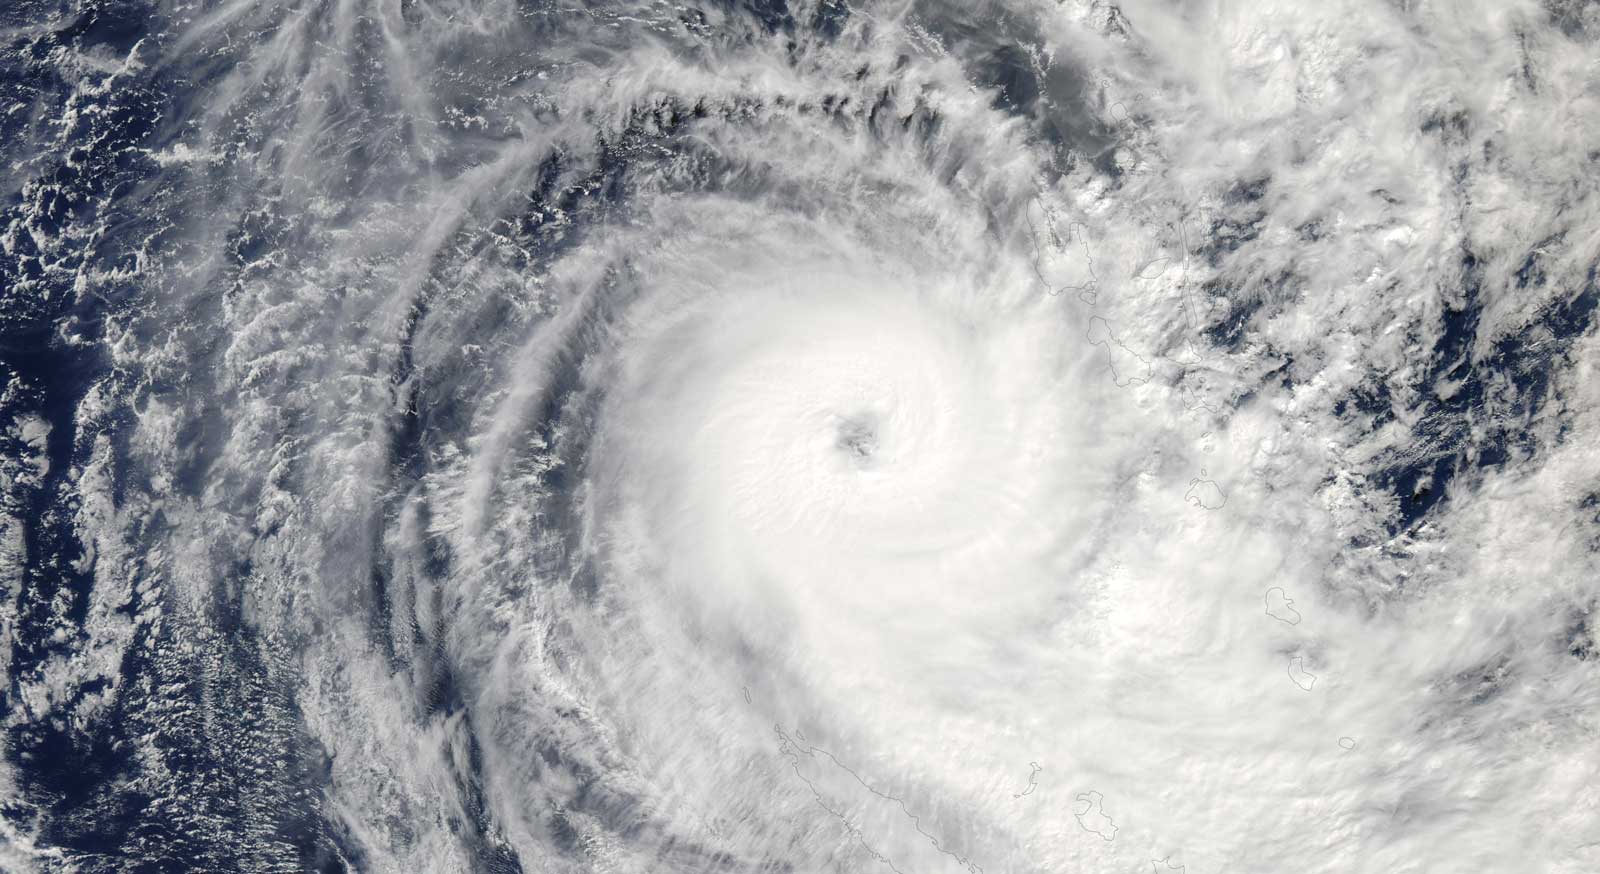 HEADER-how-to-prepare-for-a-cyclone-in-fiji-Credit-NASA-Earth-Observatory